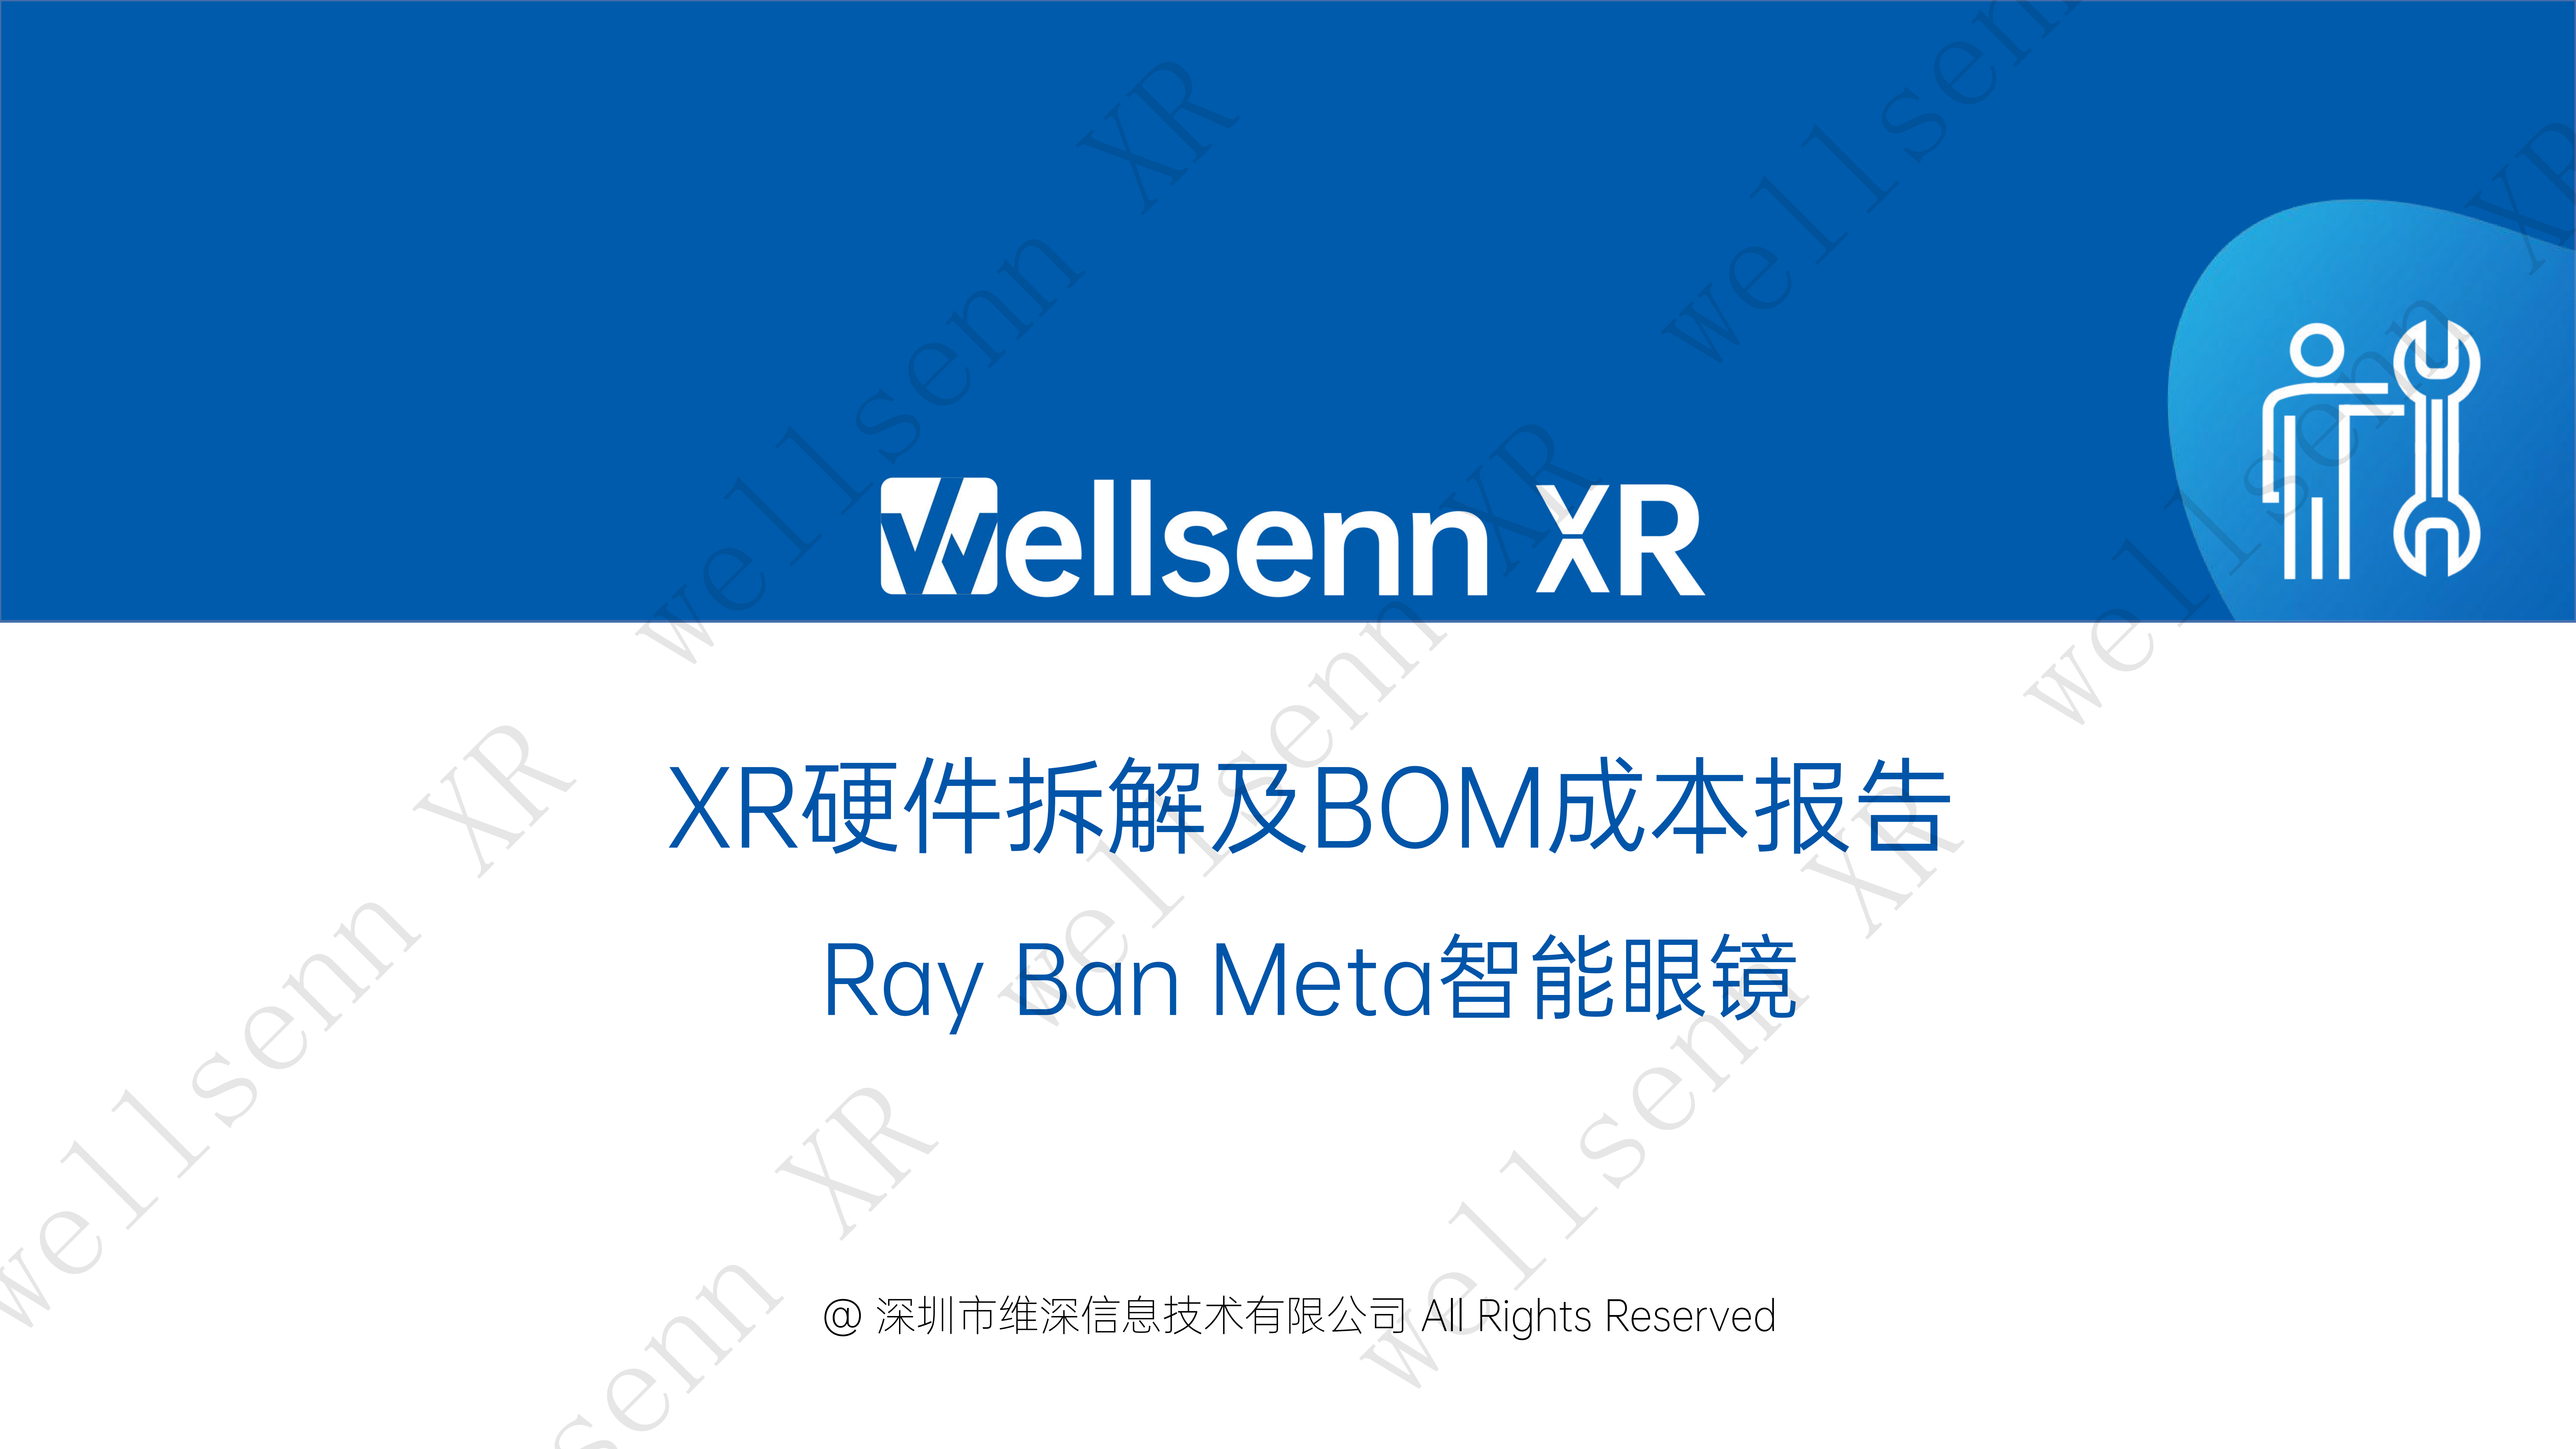 XR Hardware disassembly and BOM Cost report: Meta Ray Ban Smart Glasses